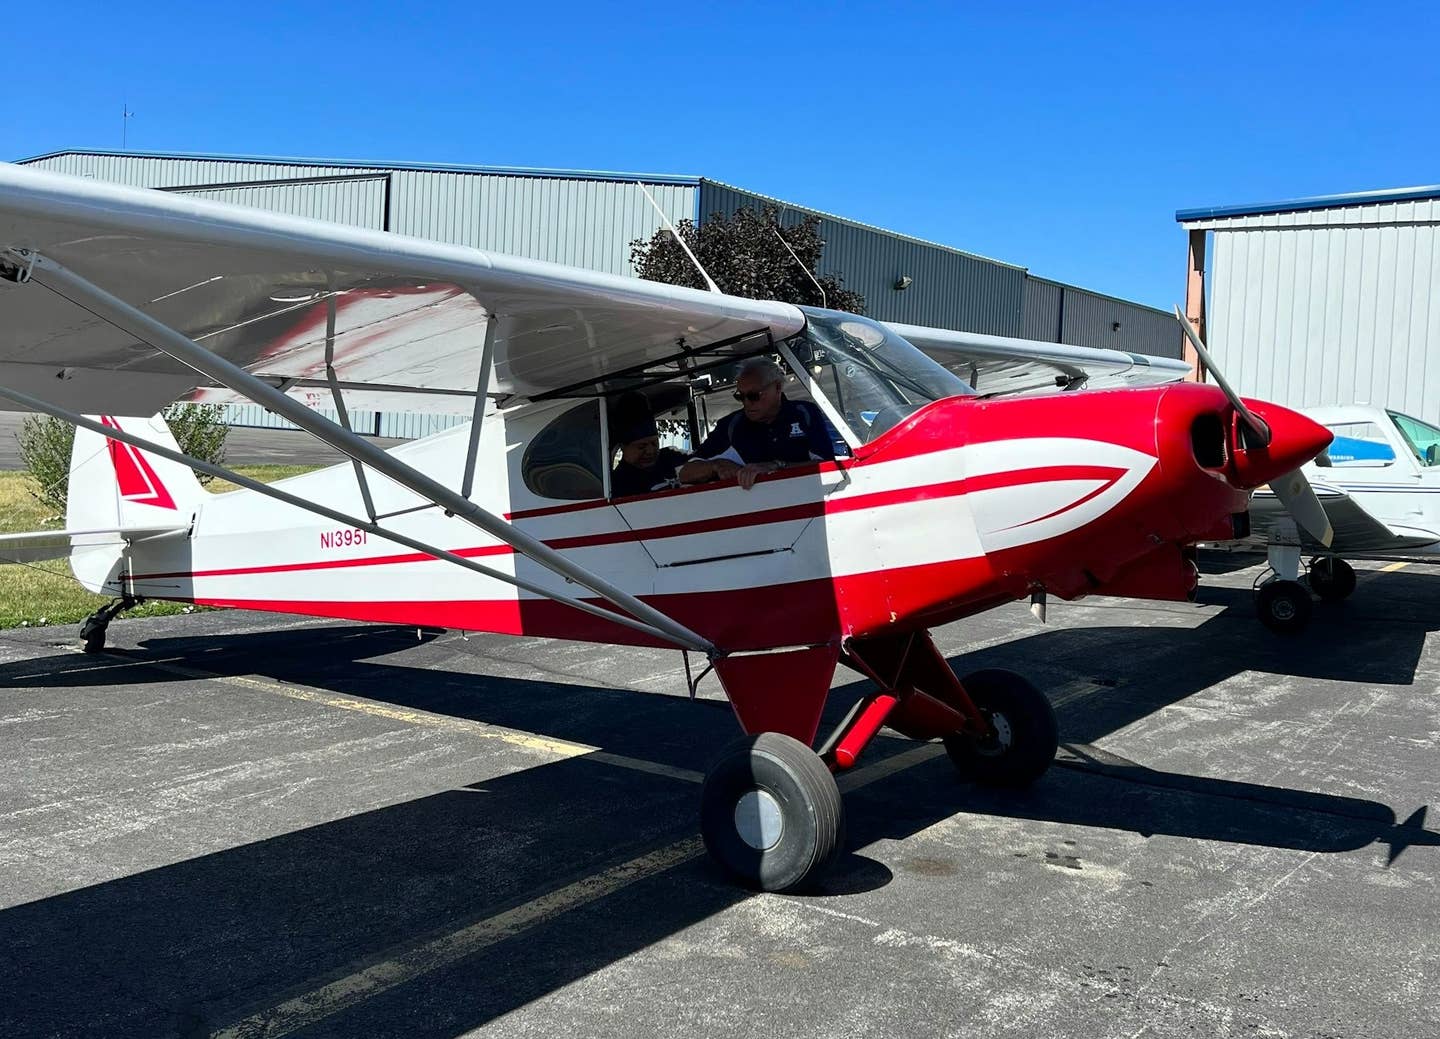 This 1972 Piper PA-18 Super Cub Is a Go-Anywhere ‘AircraftForSale’ Top Pick